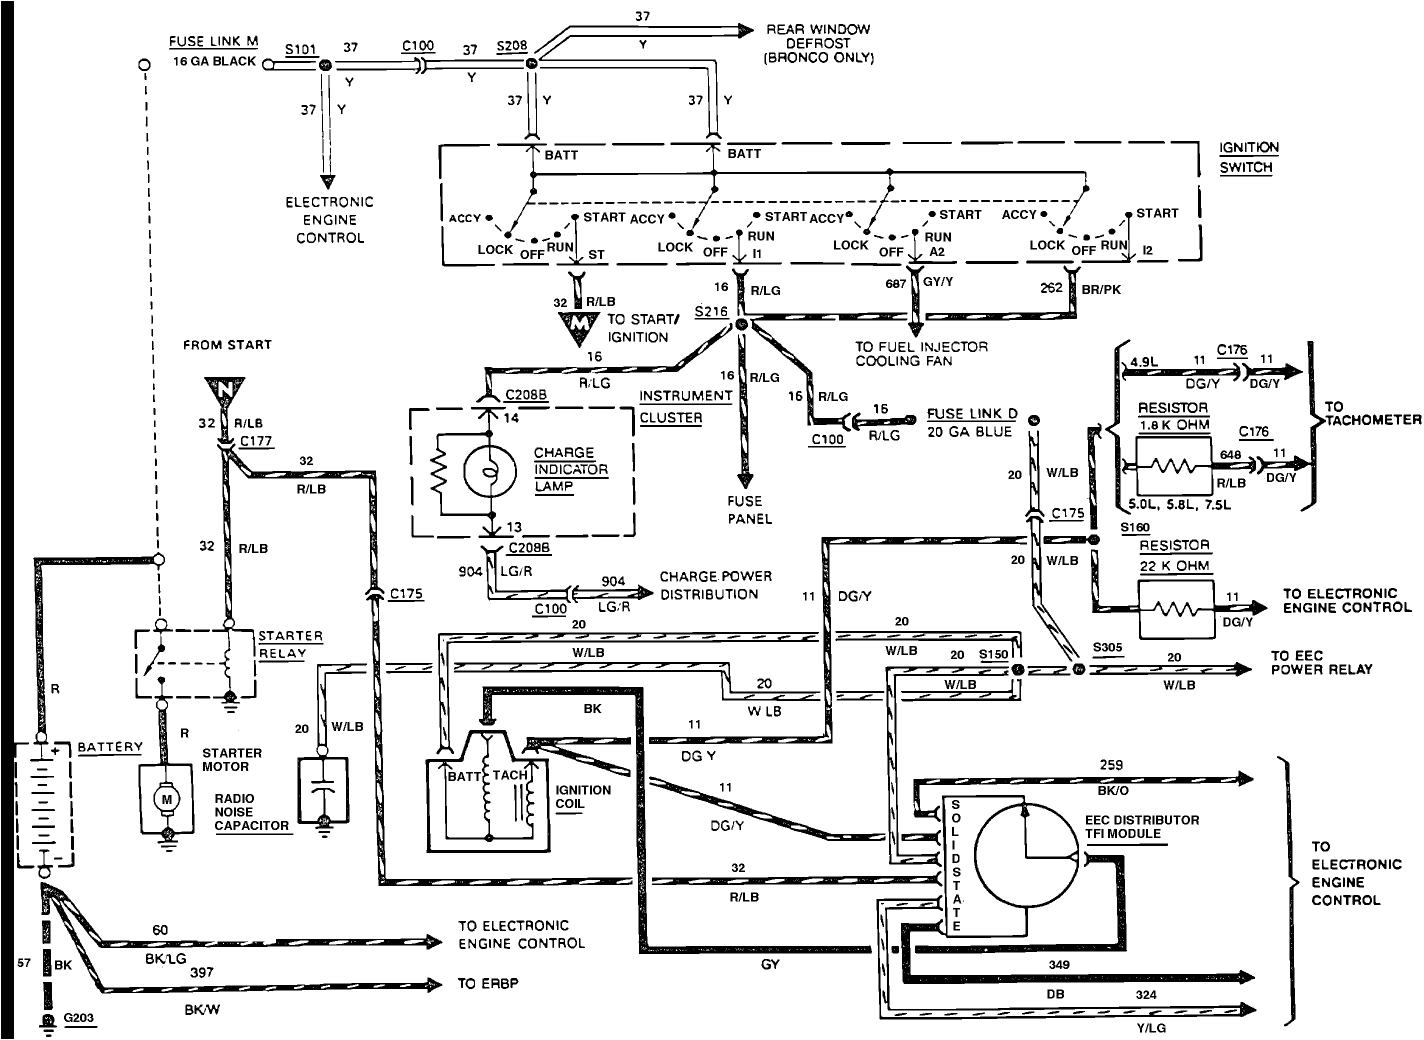 1988 f150 wiring diagram wiring diagram page ride besides 1986 ford f 150 ignition switch wiring in addition ford